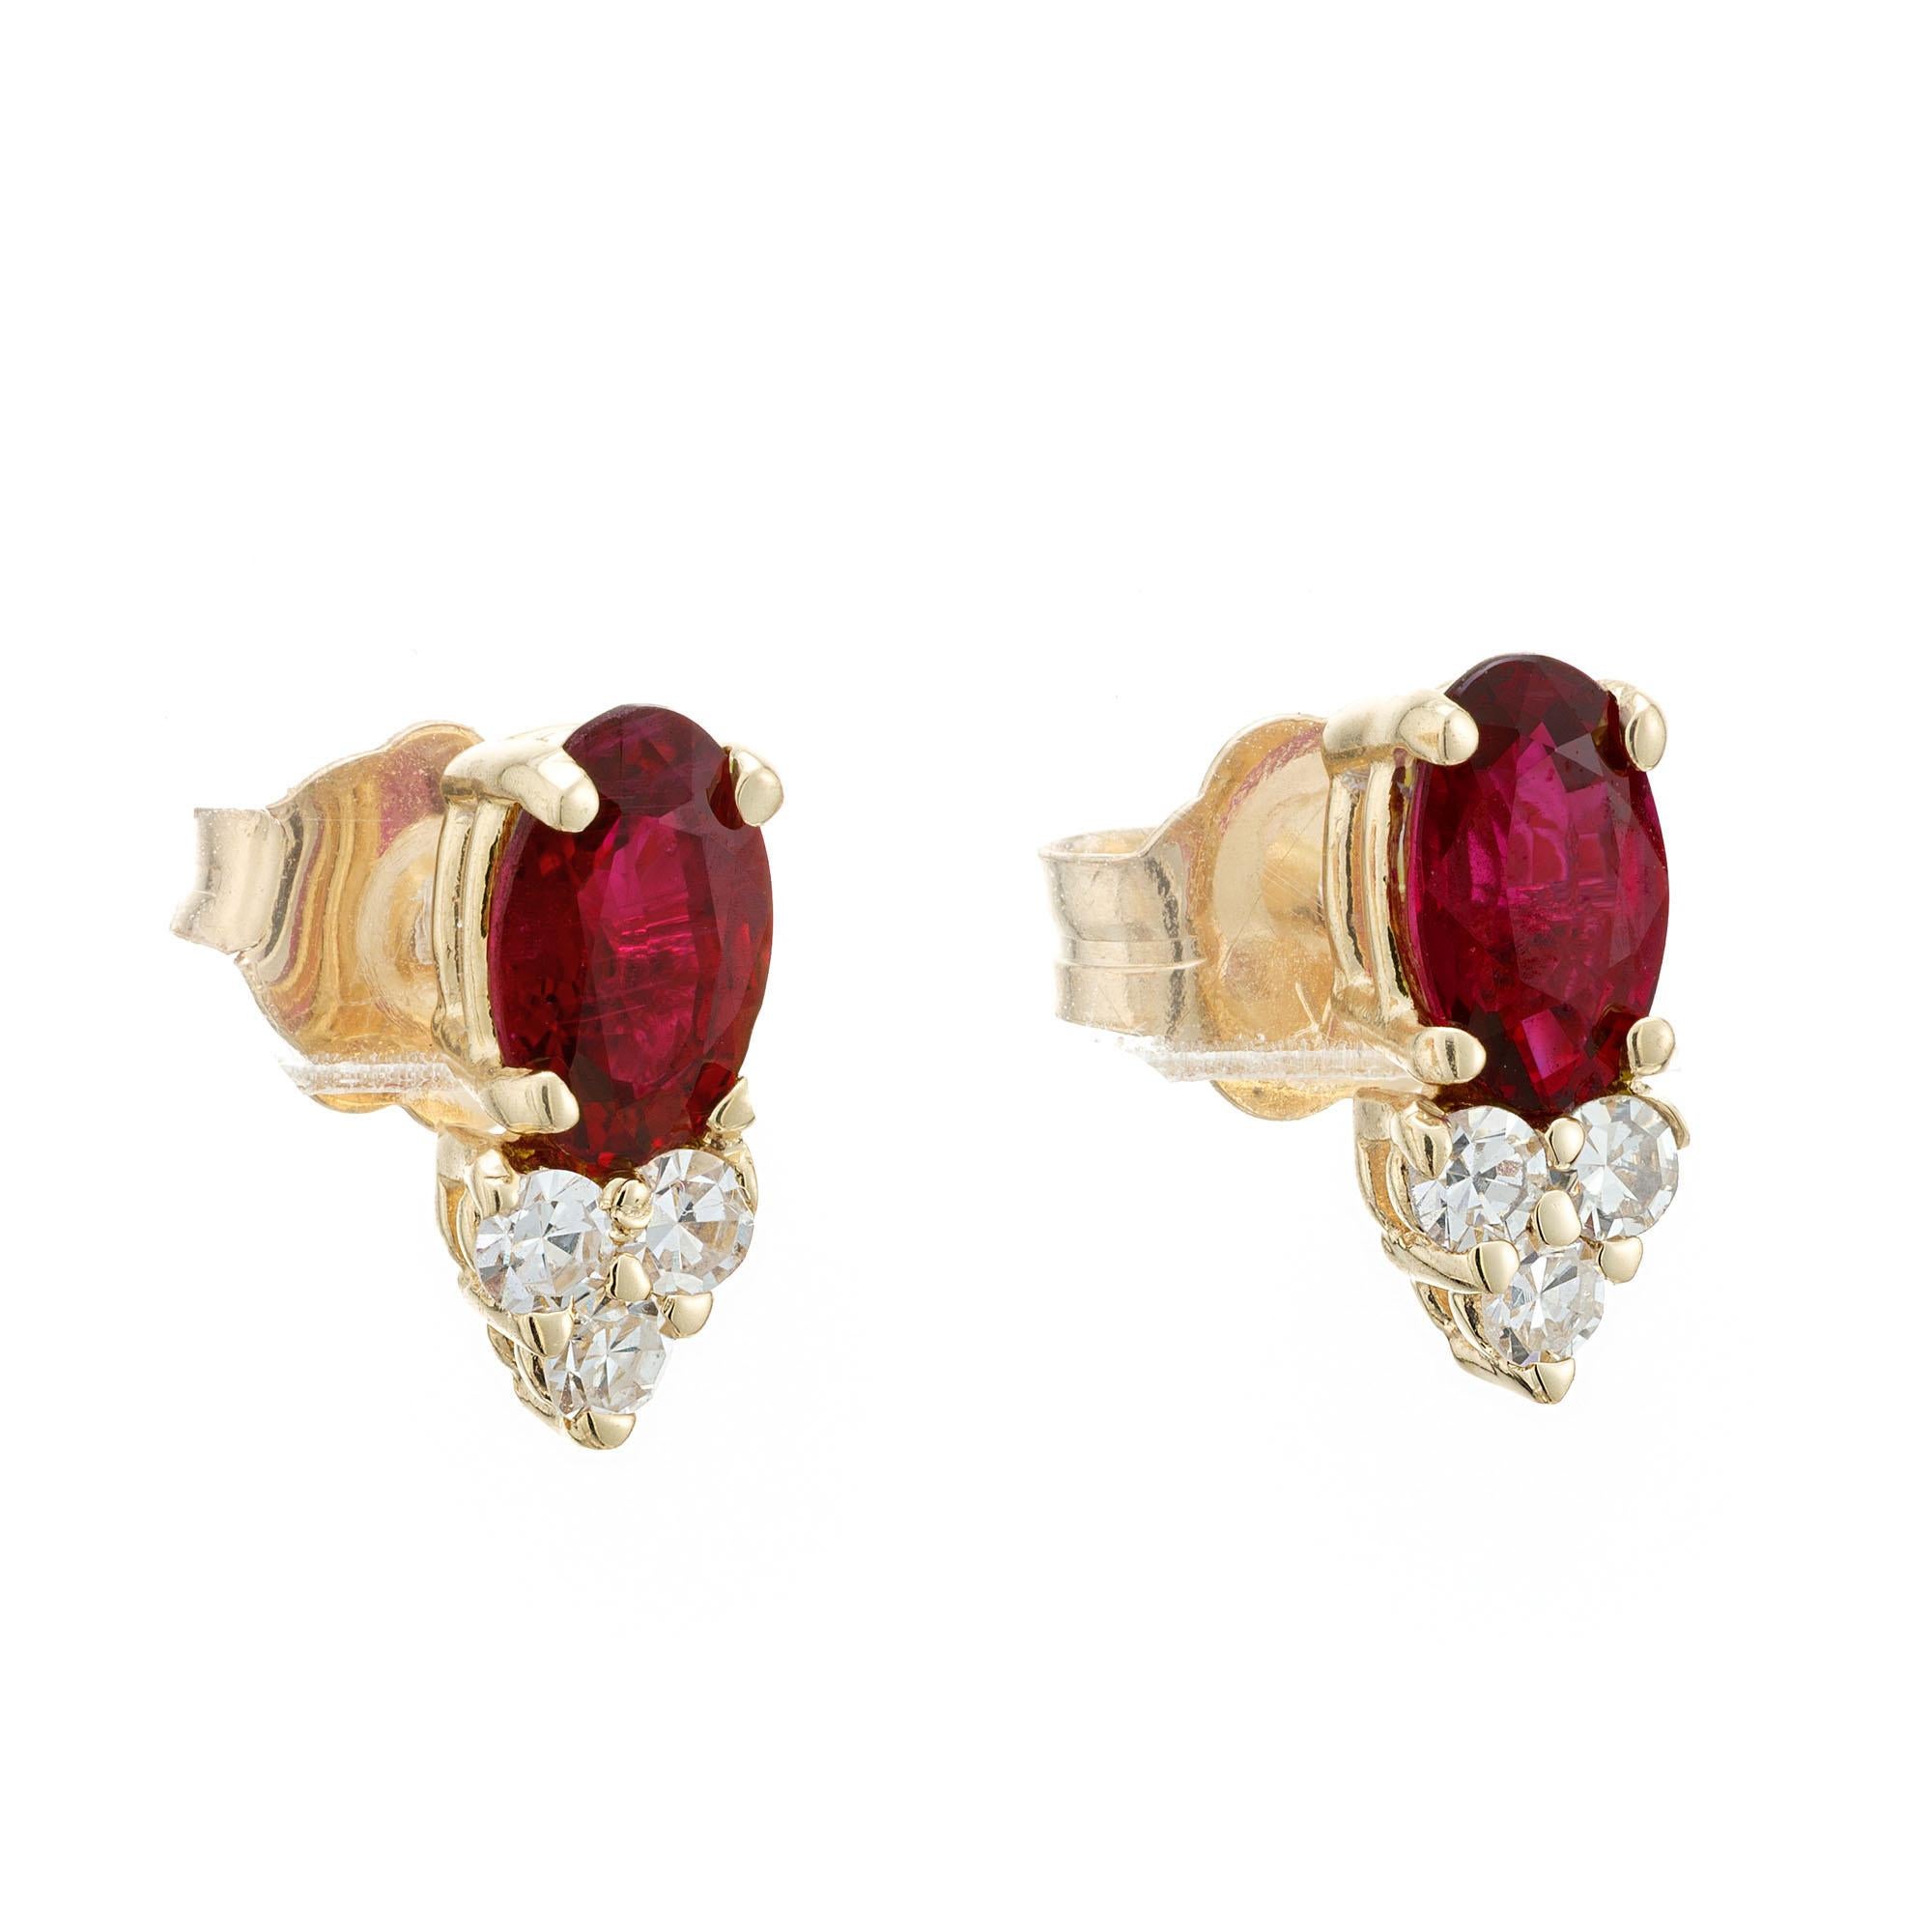 Ruby and diamond earrings. 2 oval rubies, each with 3 single cut accent diamonds set in 14k yellow gold.  

2 oval natural red rubies, SI approx. .60cts
6 single cut diamonds, H VS approx. .9cts
14k yellow gold 
Stamped: 14k
1.2 grams
Top to bottom: